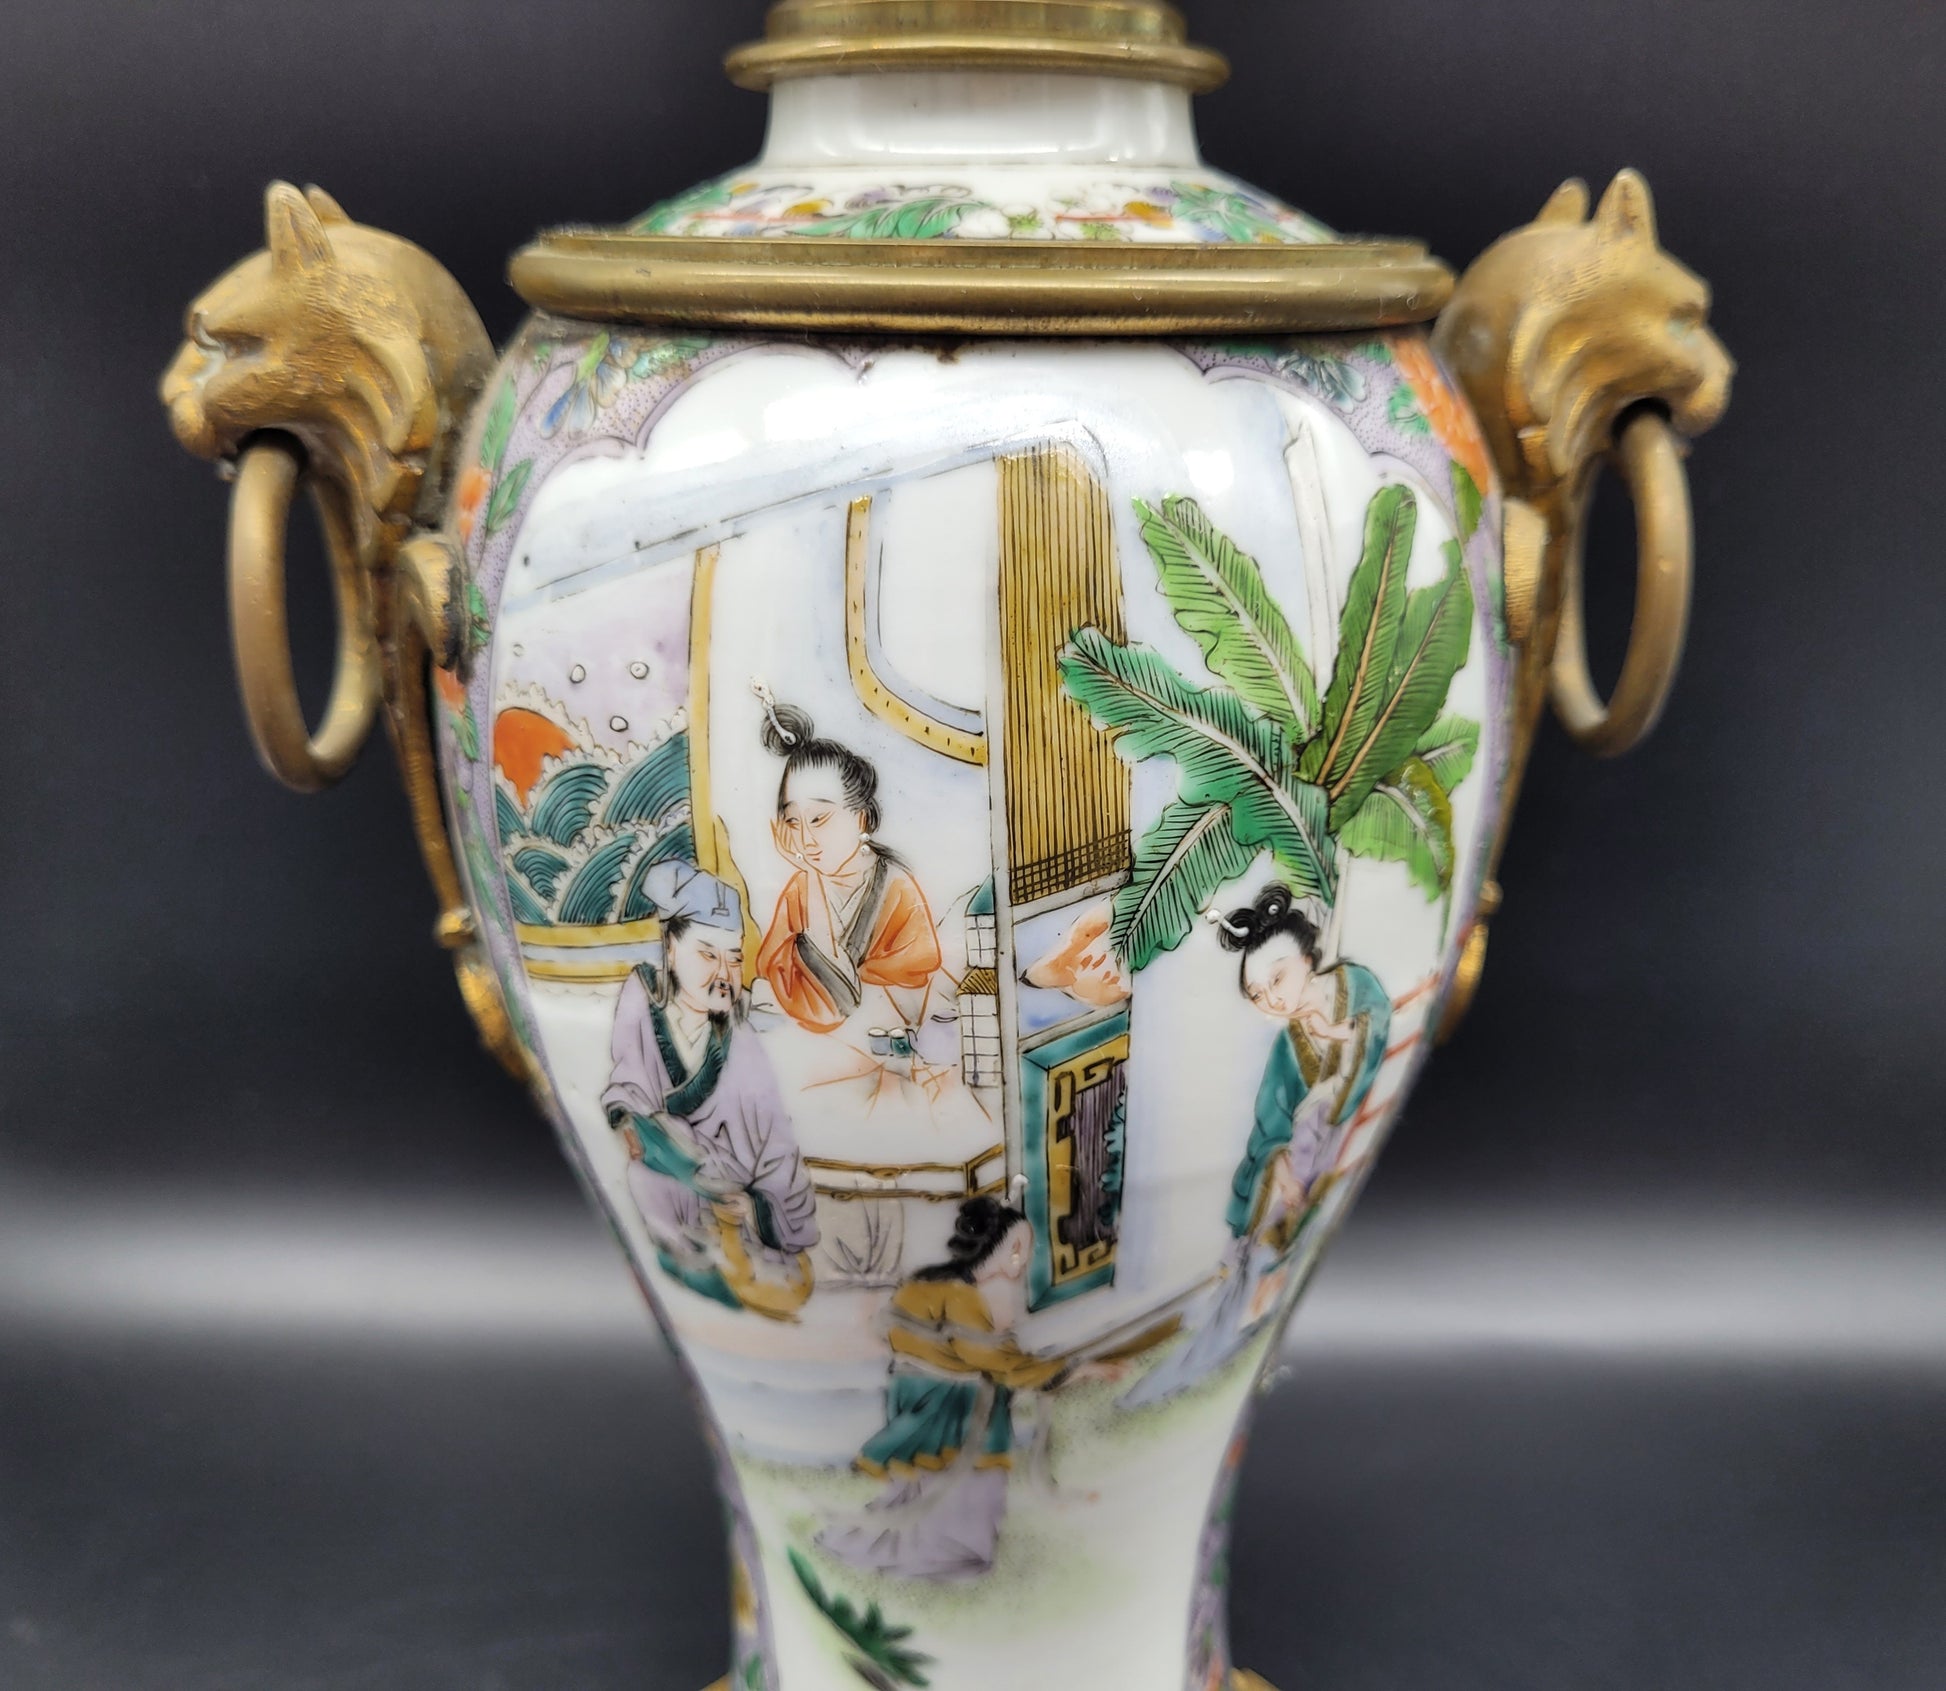 CHINESE ANTIQUE PORCELAIN FOR SALE USA Beautiful Antique Chinese 18th /19th Century Famille Vert Vase With High Quality Ormolu Mounts.